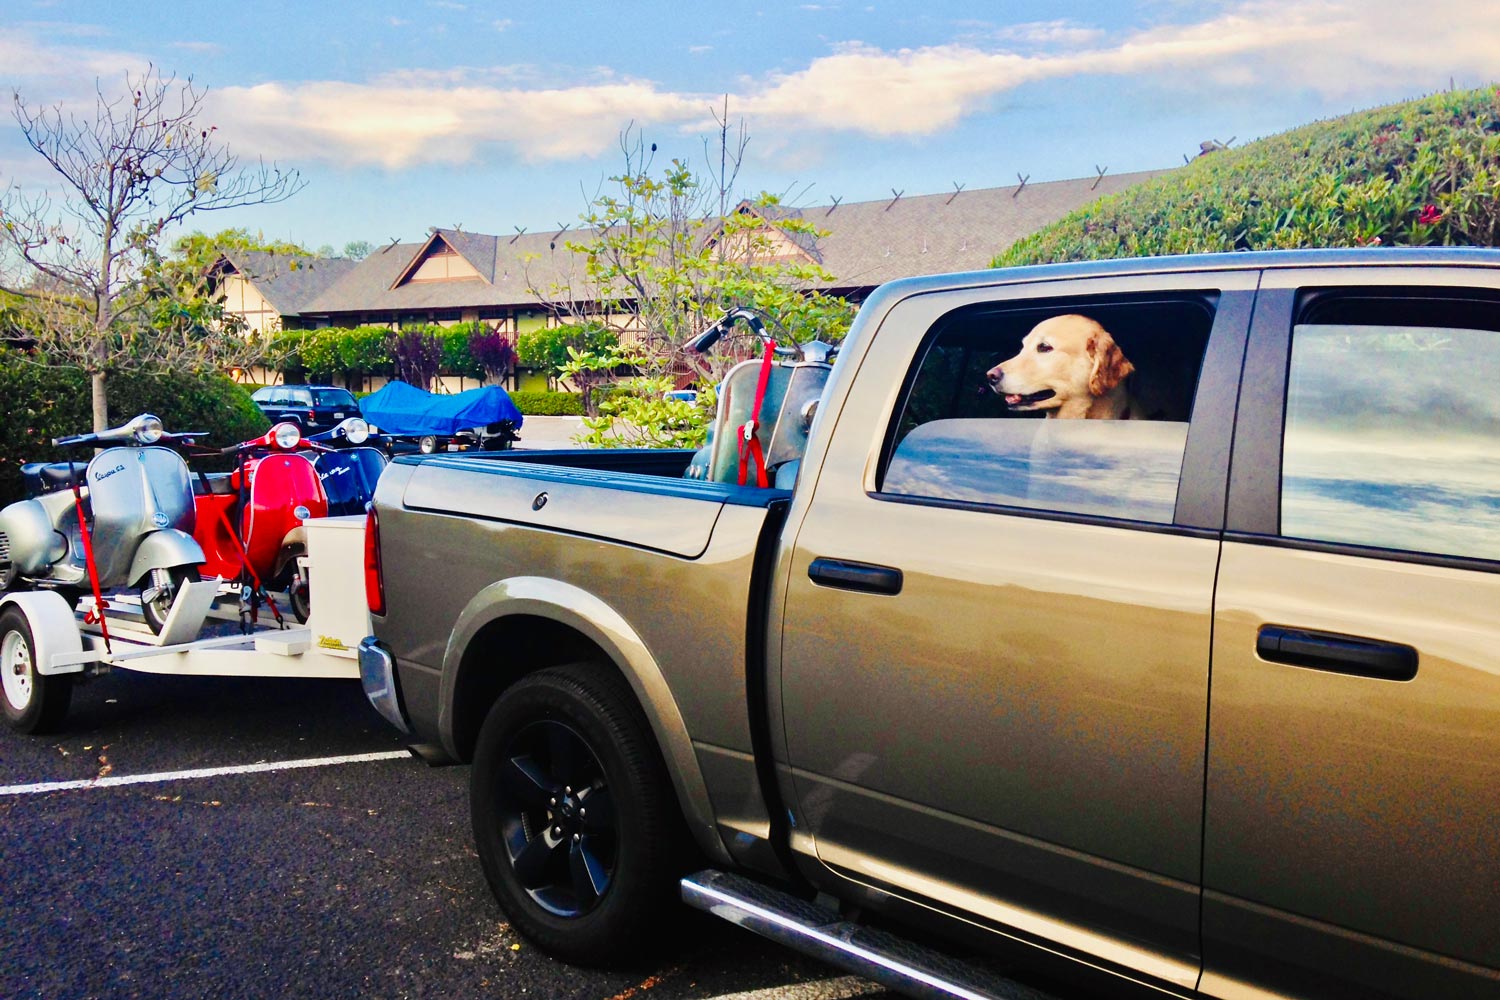 A green Ram truck with a golden retriever sticking his head out of the rear passenger window tows a white motorcycle trailer.